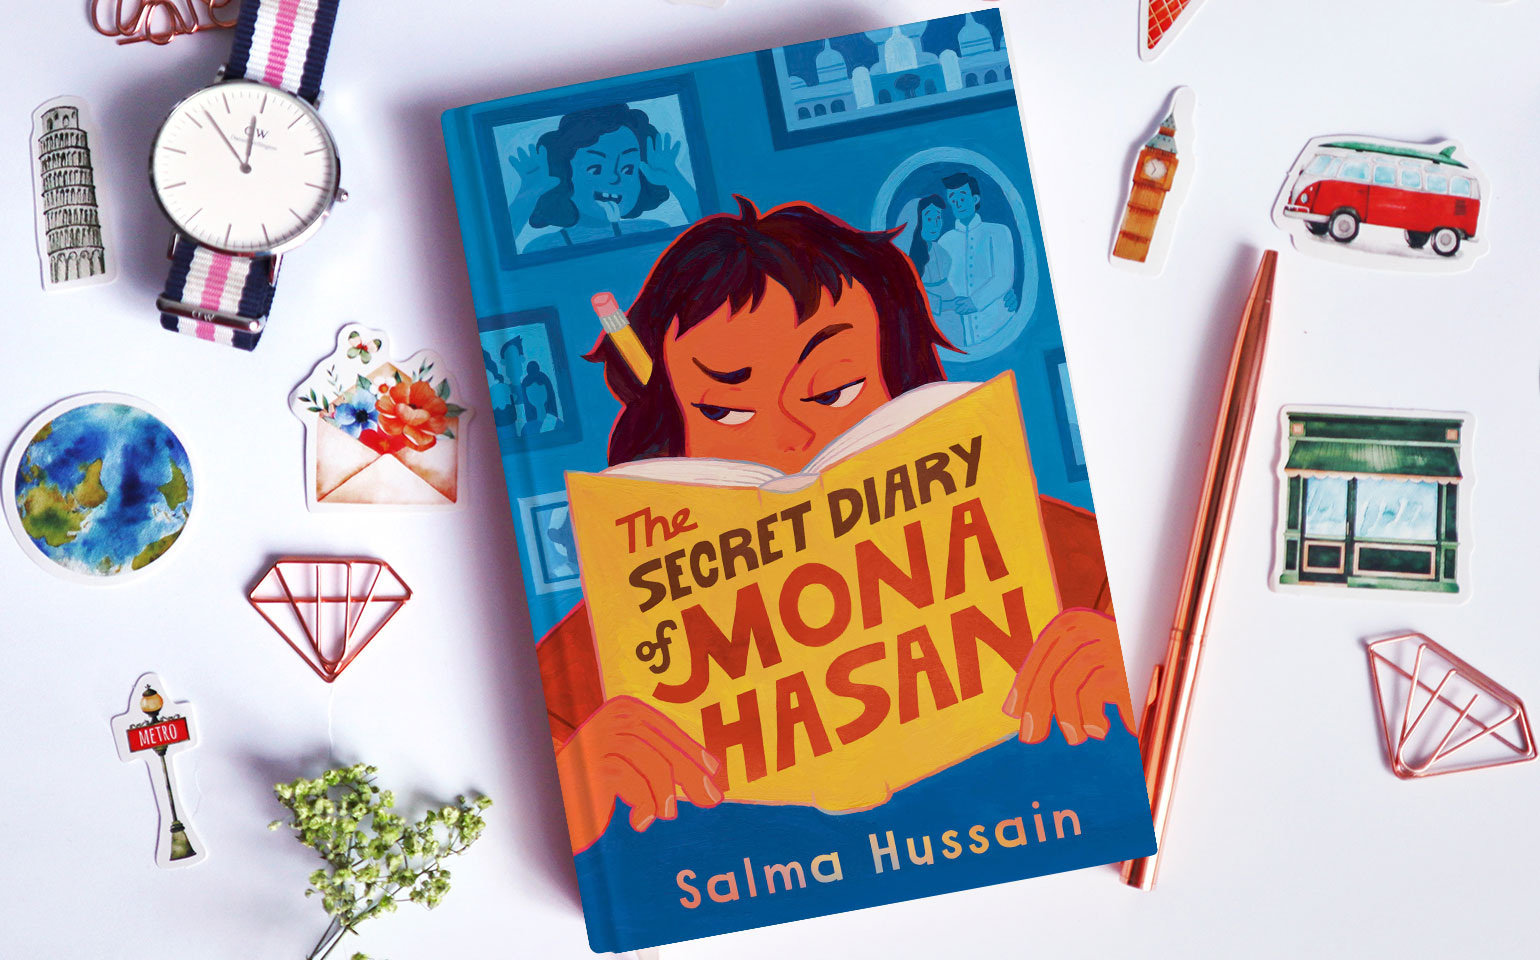 The cover of The Secret Diary of Mona Hasan is shown, which shows Mona peering over the top of a book.